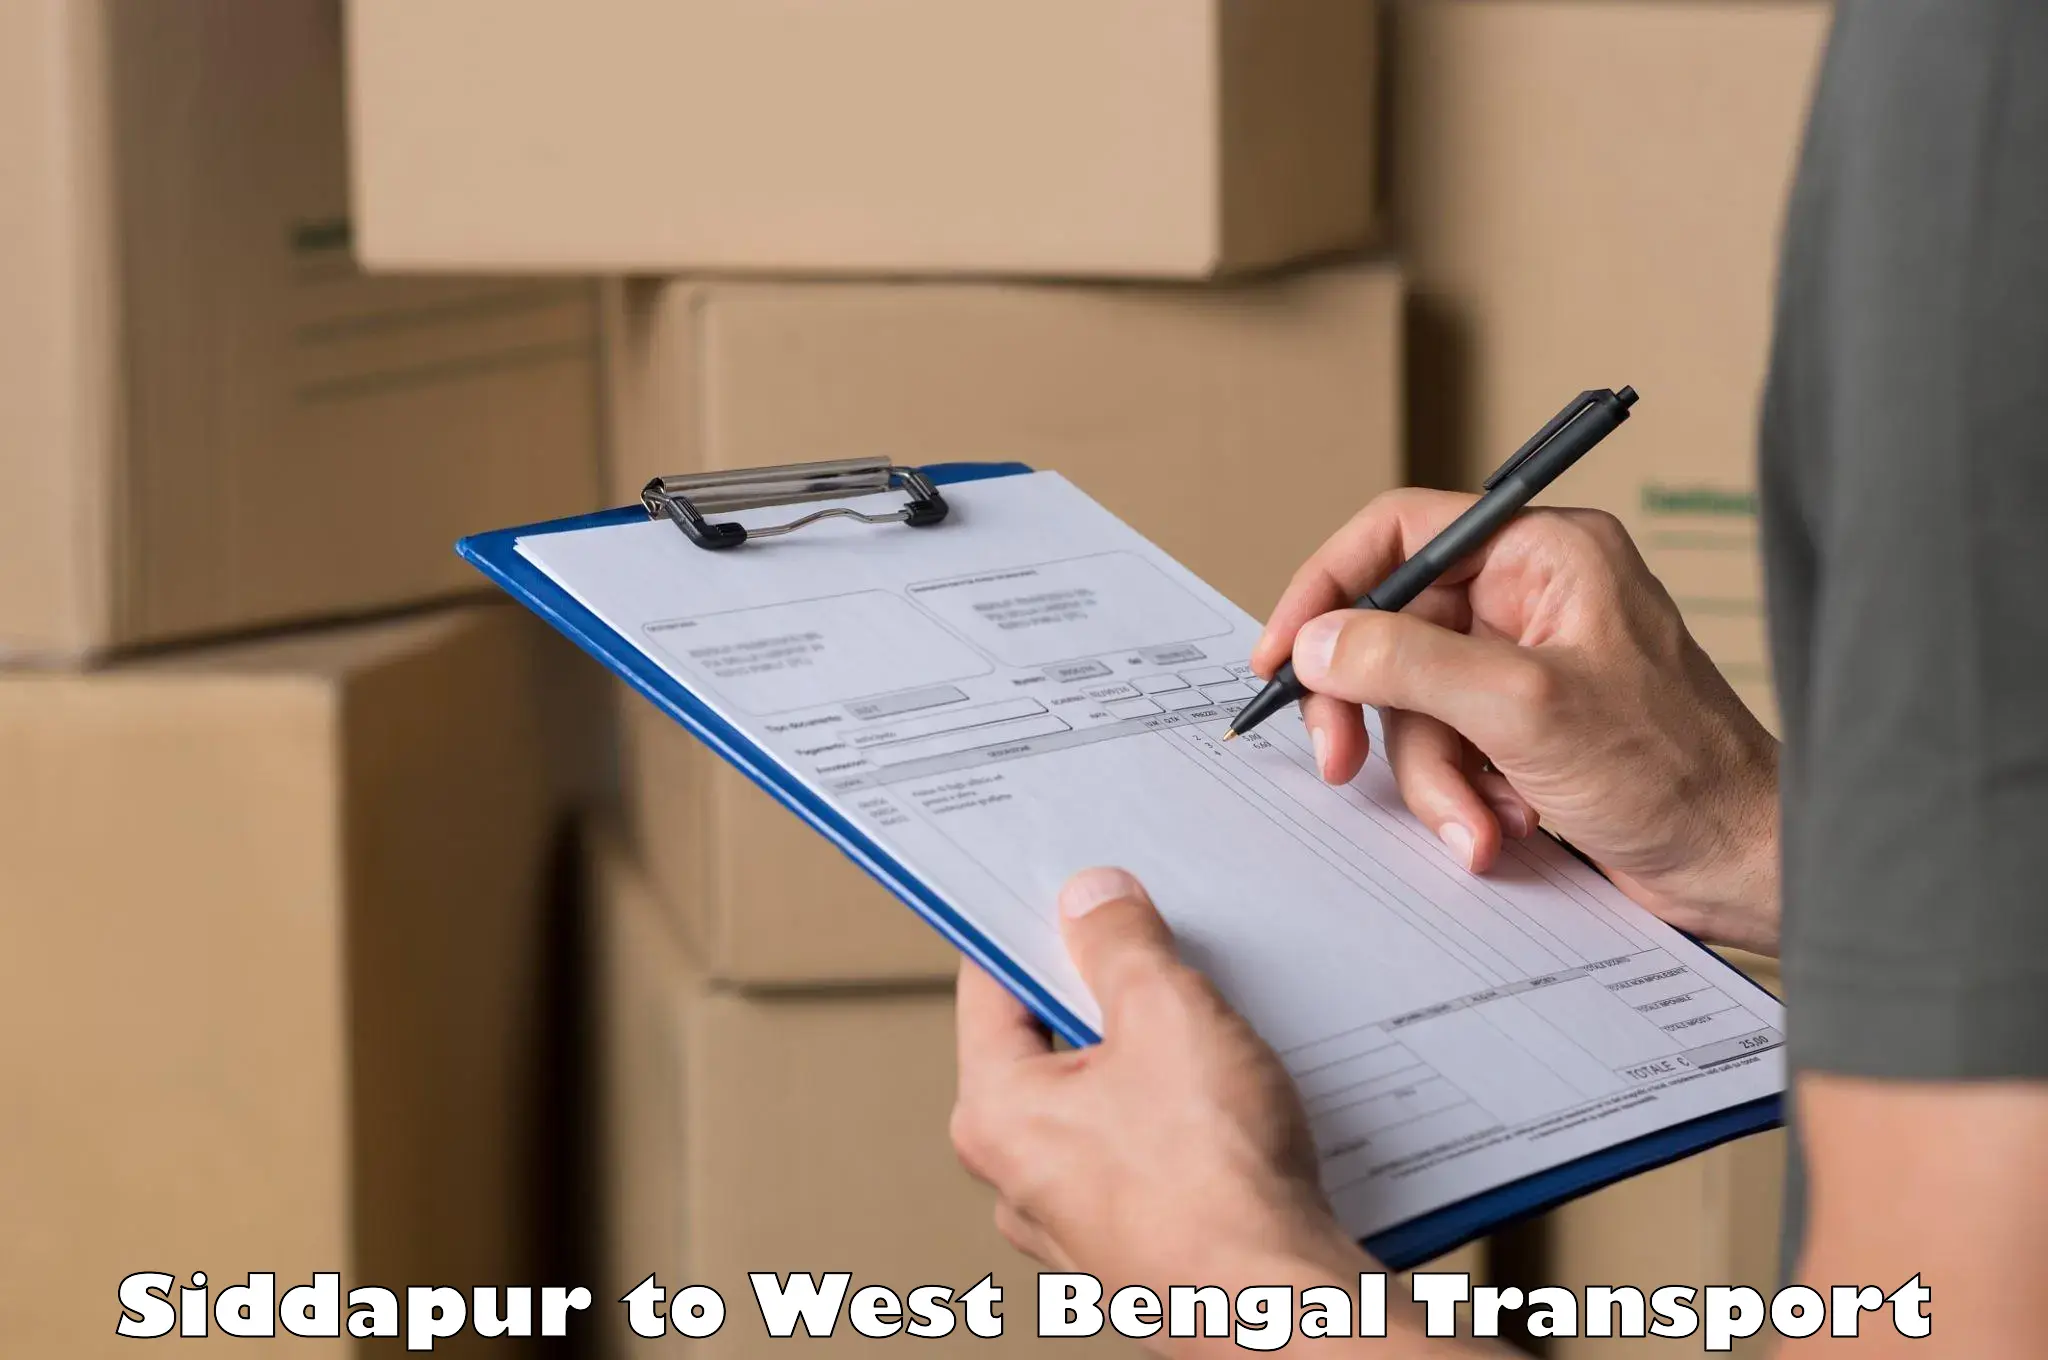 Truck transport companies in India Siddapur to West Bengal